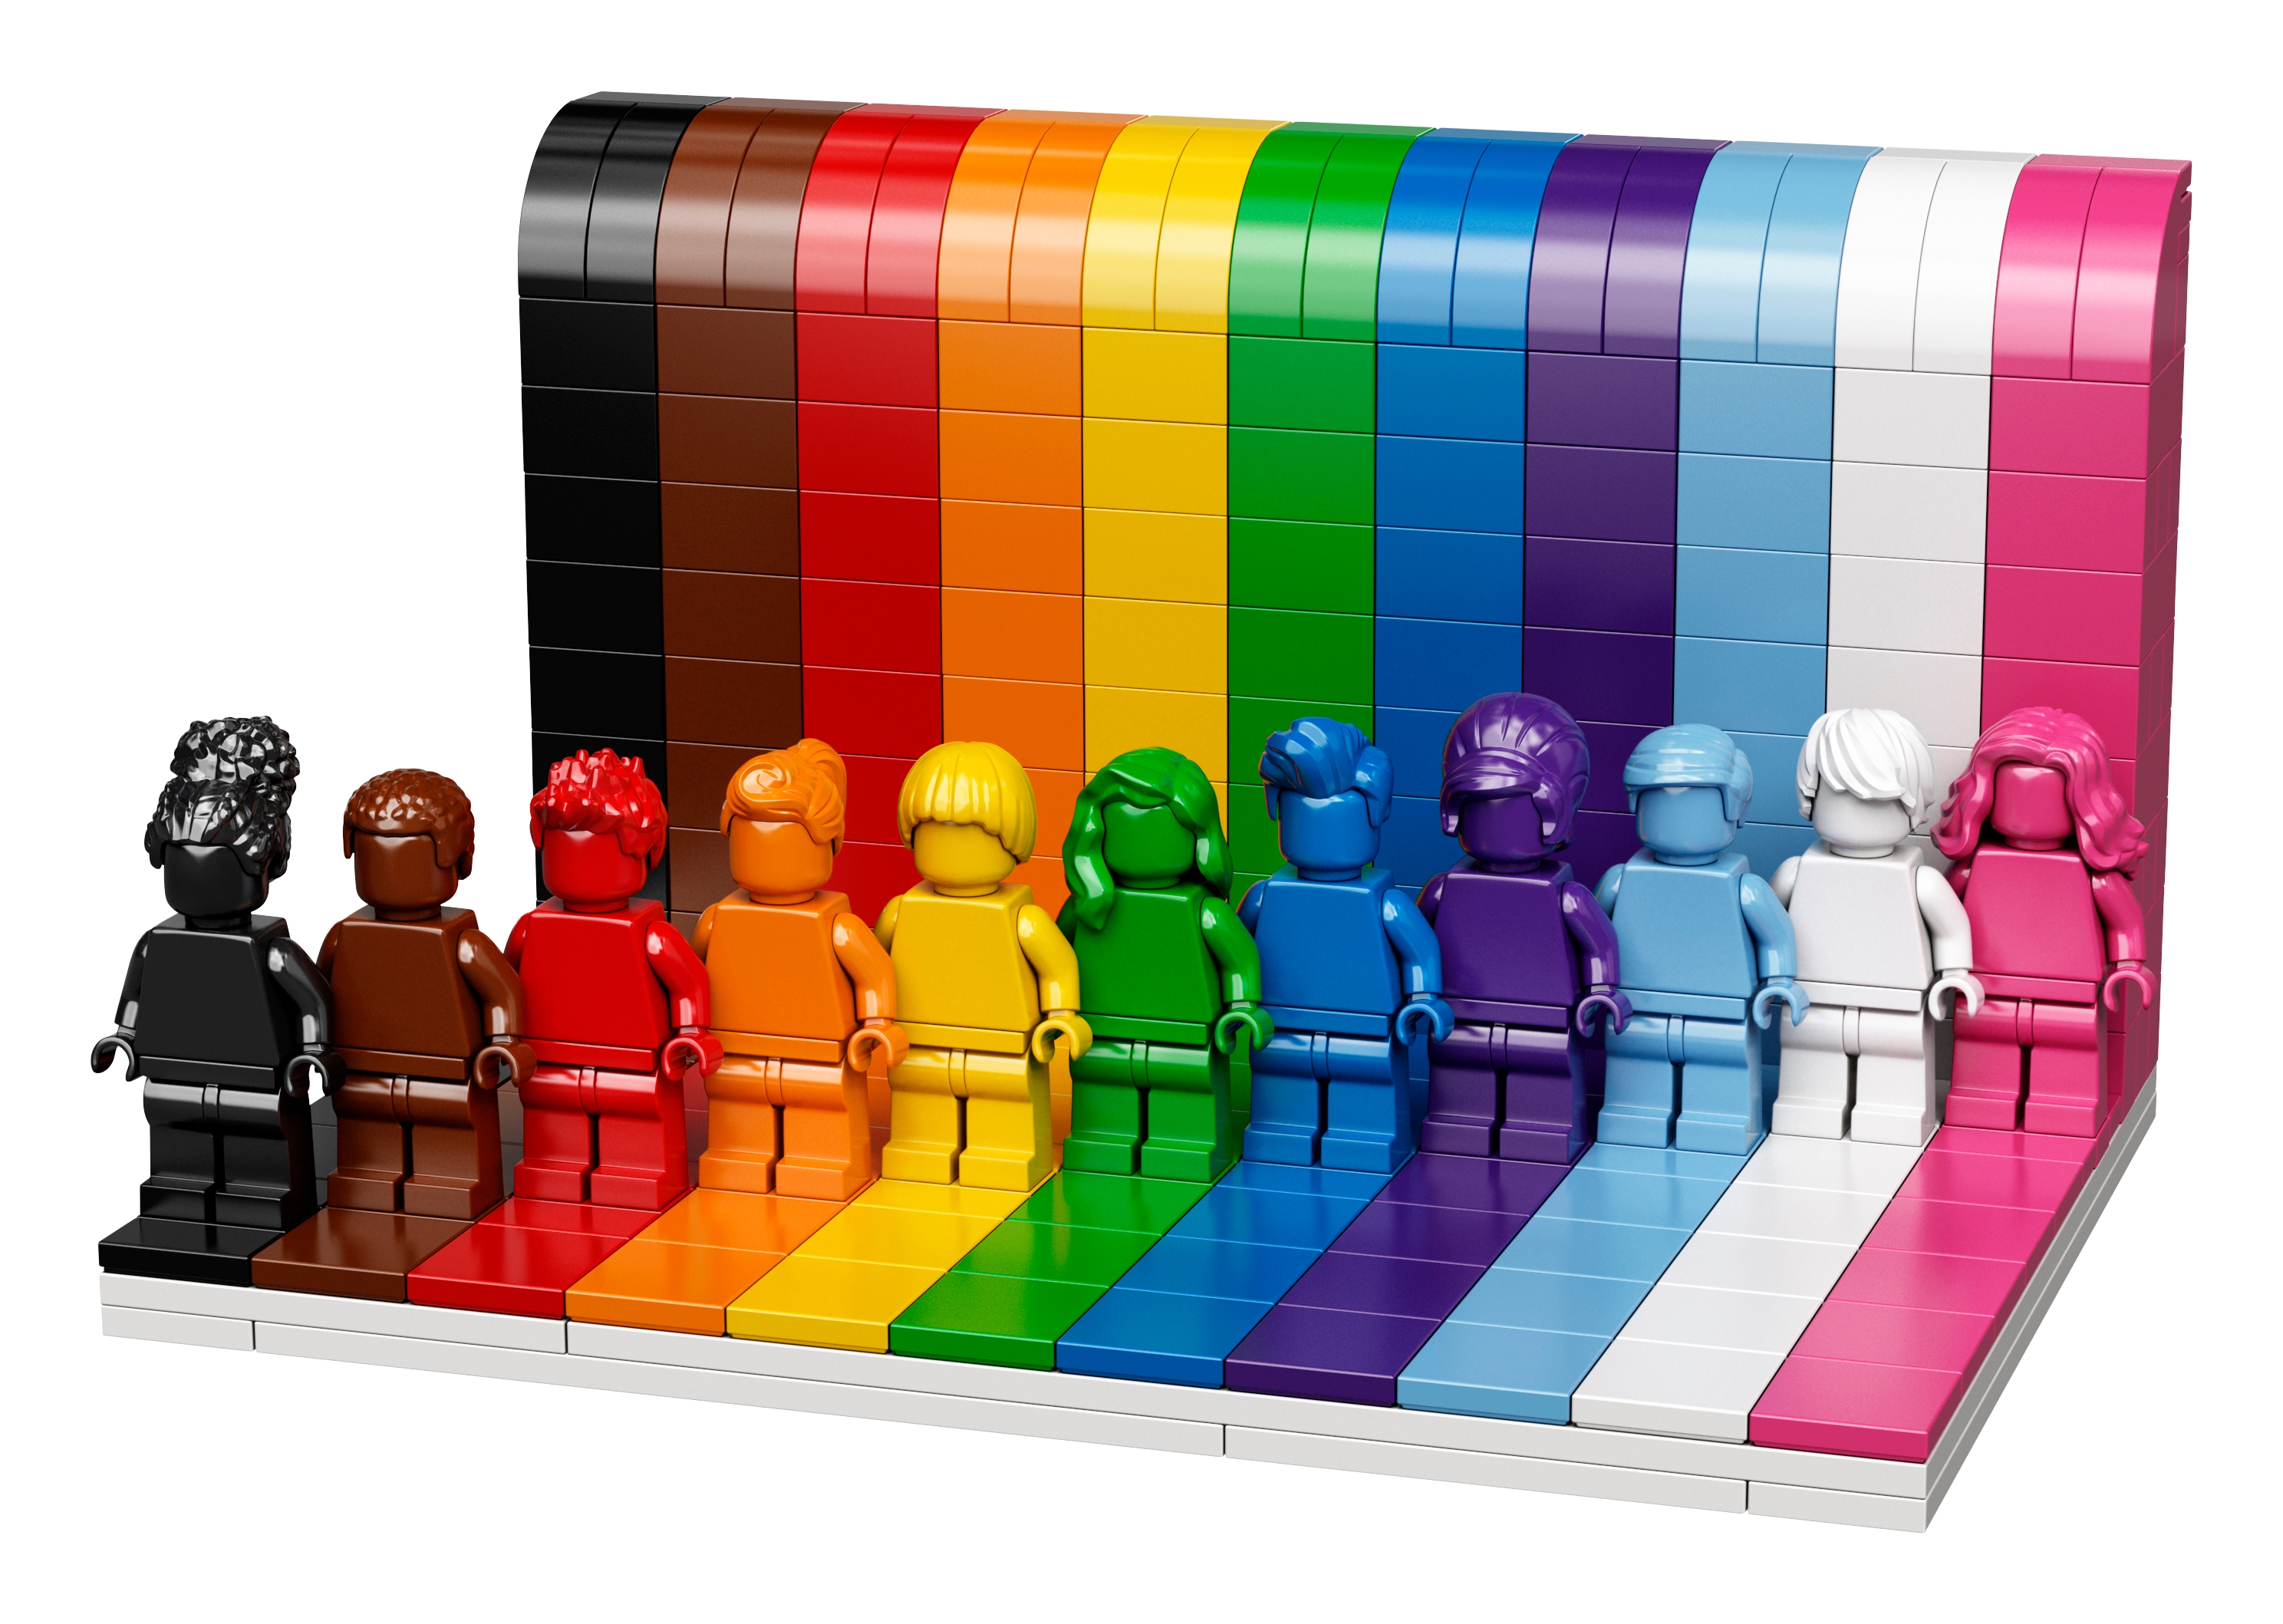 COLORFUL MINIFIGURES PUZZLE rainbow lego collection target NEW legos minifig